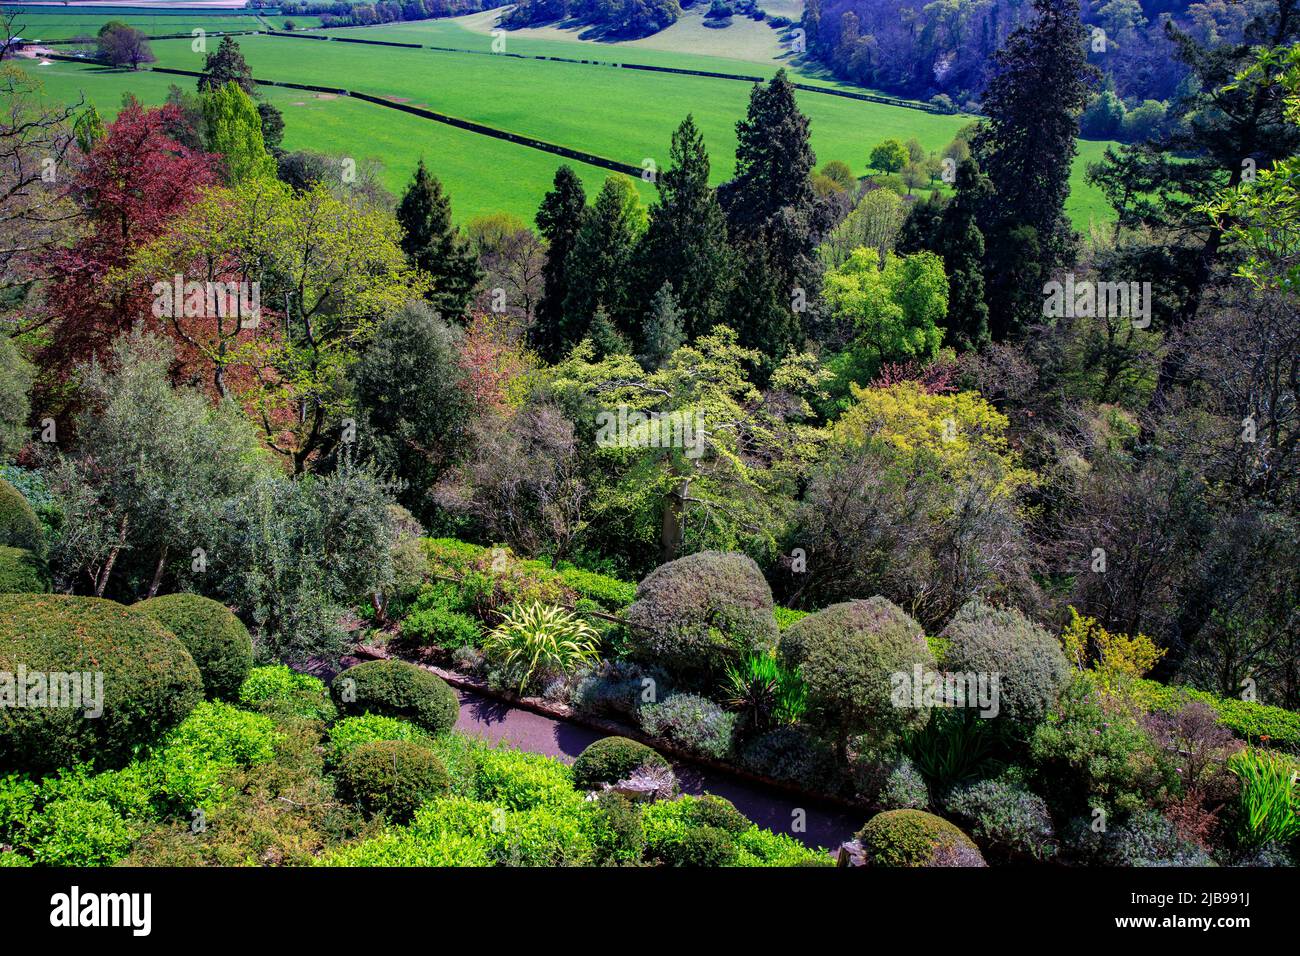 A view across some of the varied sub tropical gardens on the slopes of the mound on which Dunster Castle sits, Somerset, England, UK Stock Photo